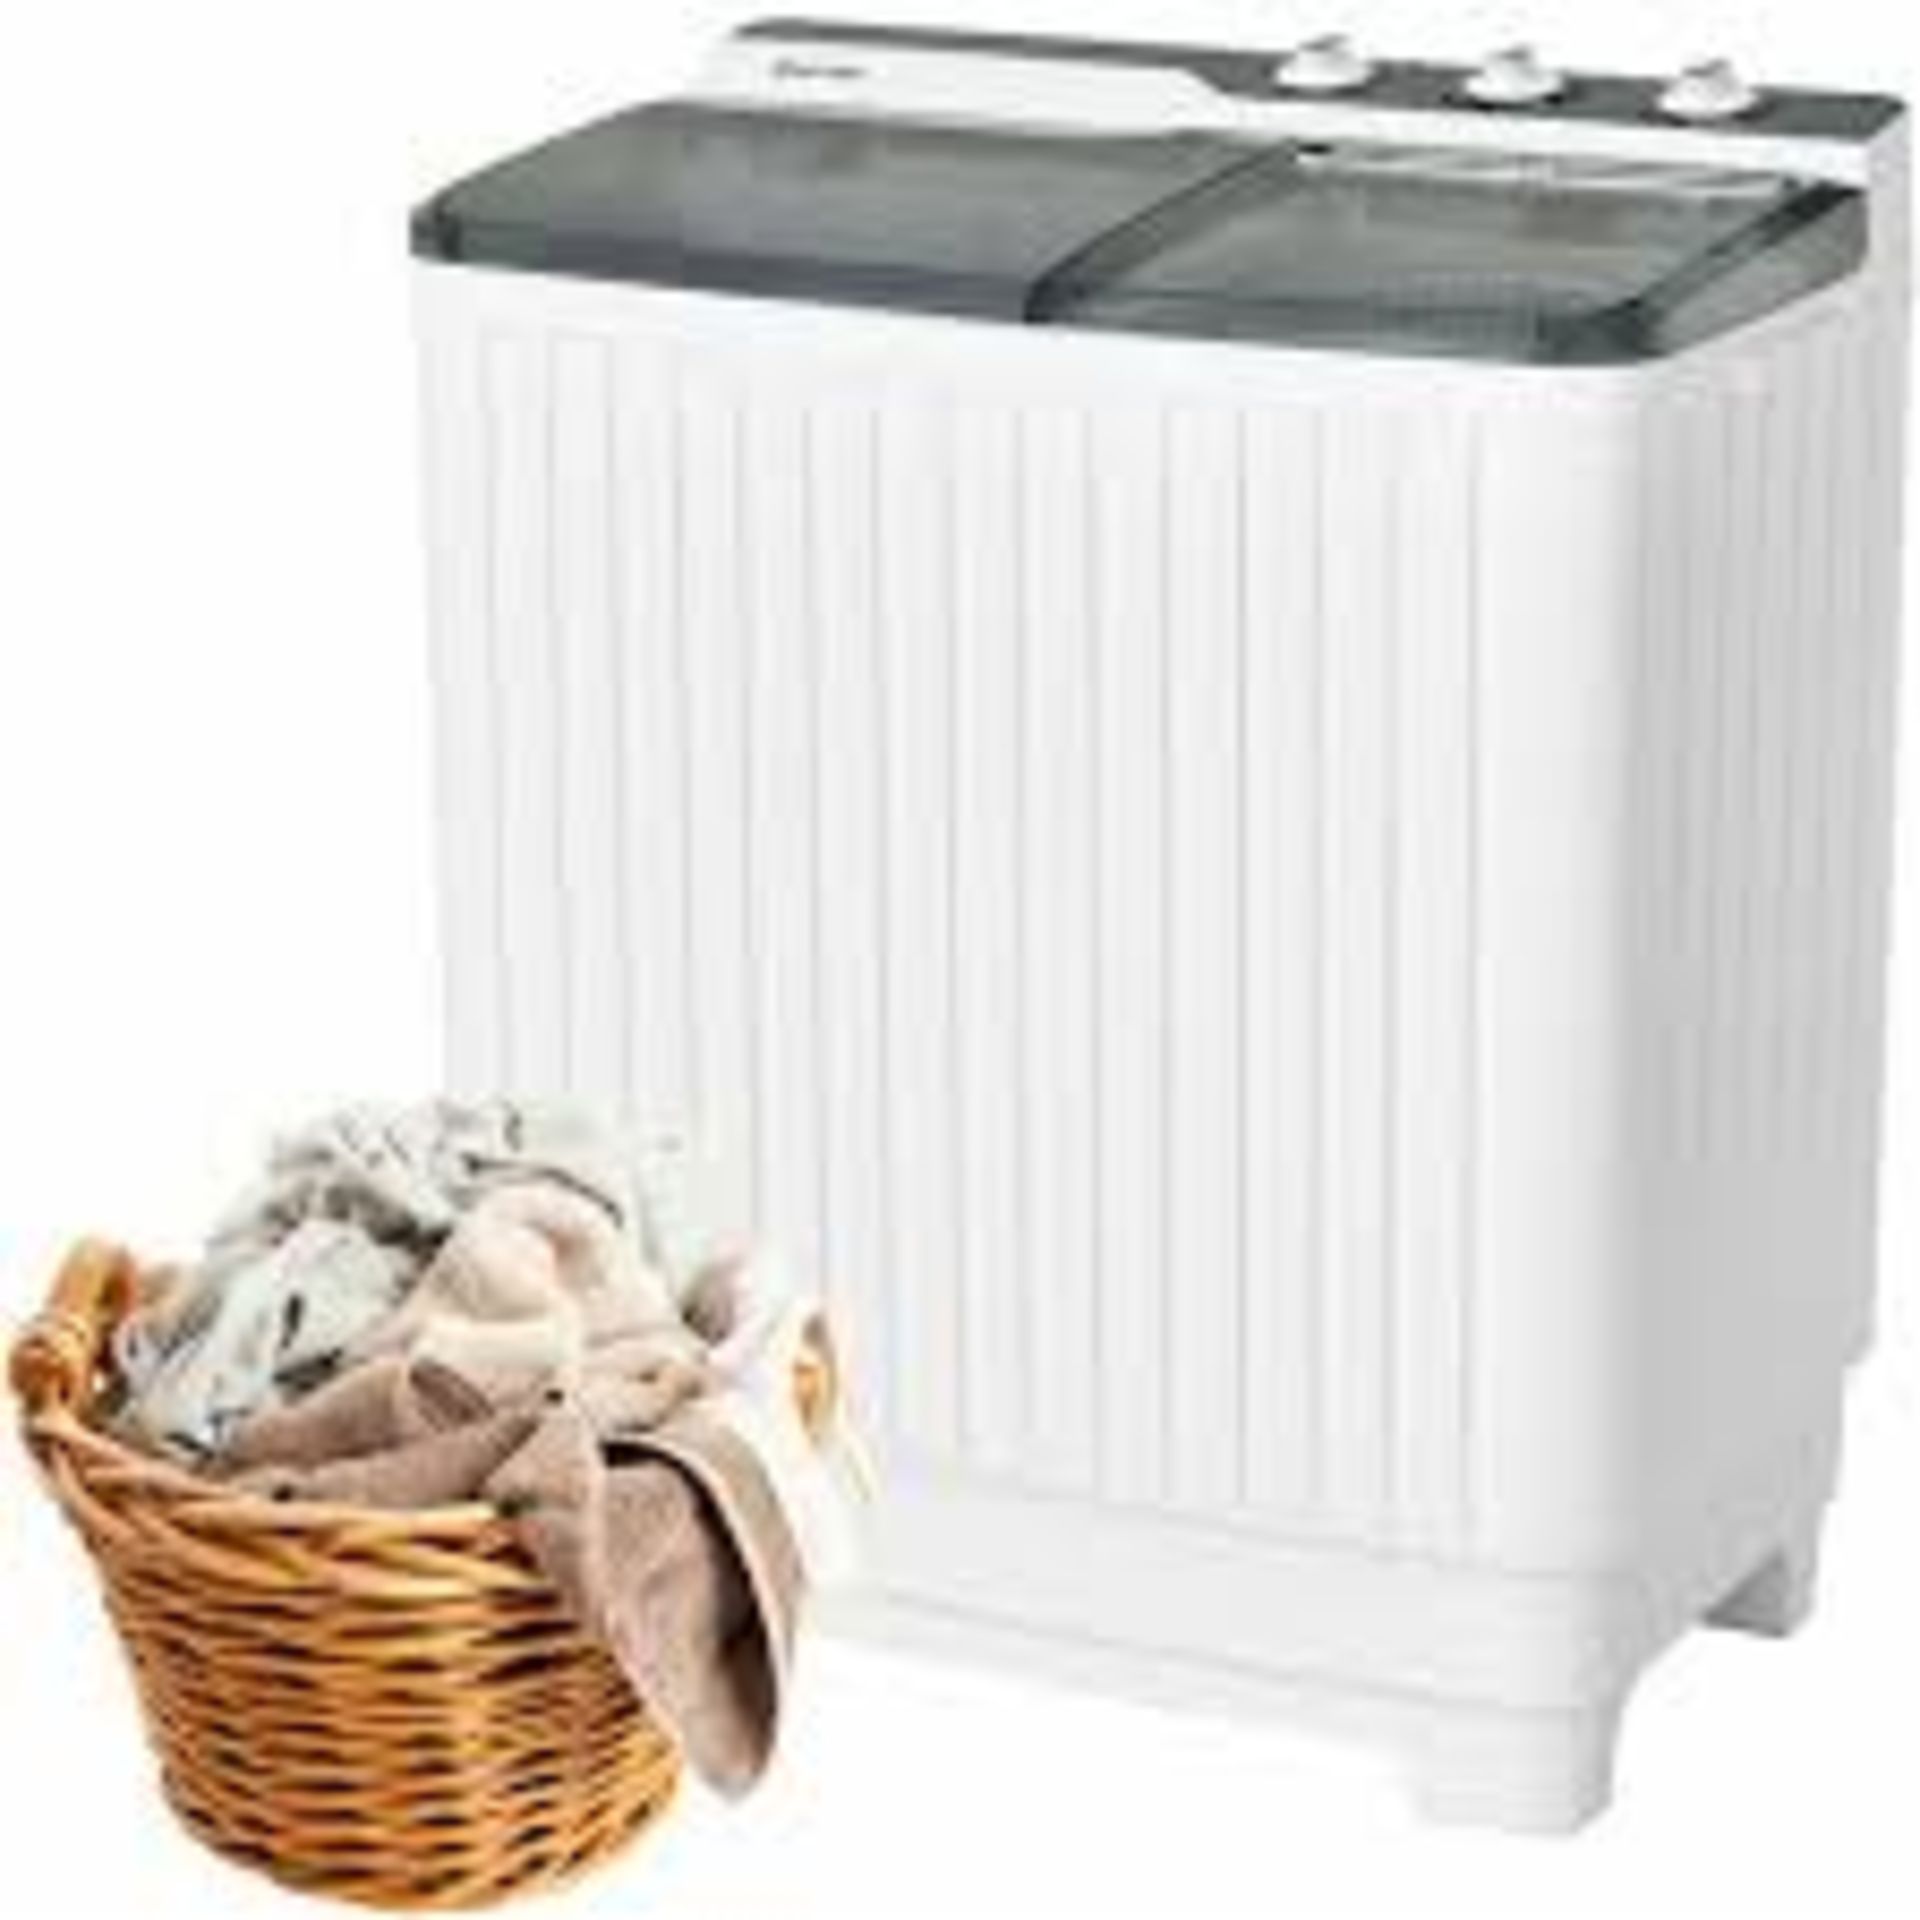 Portable Washing Machine Twin Tub Laundry Washer Spin Dryer. -R14.3.